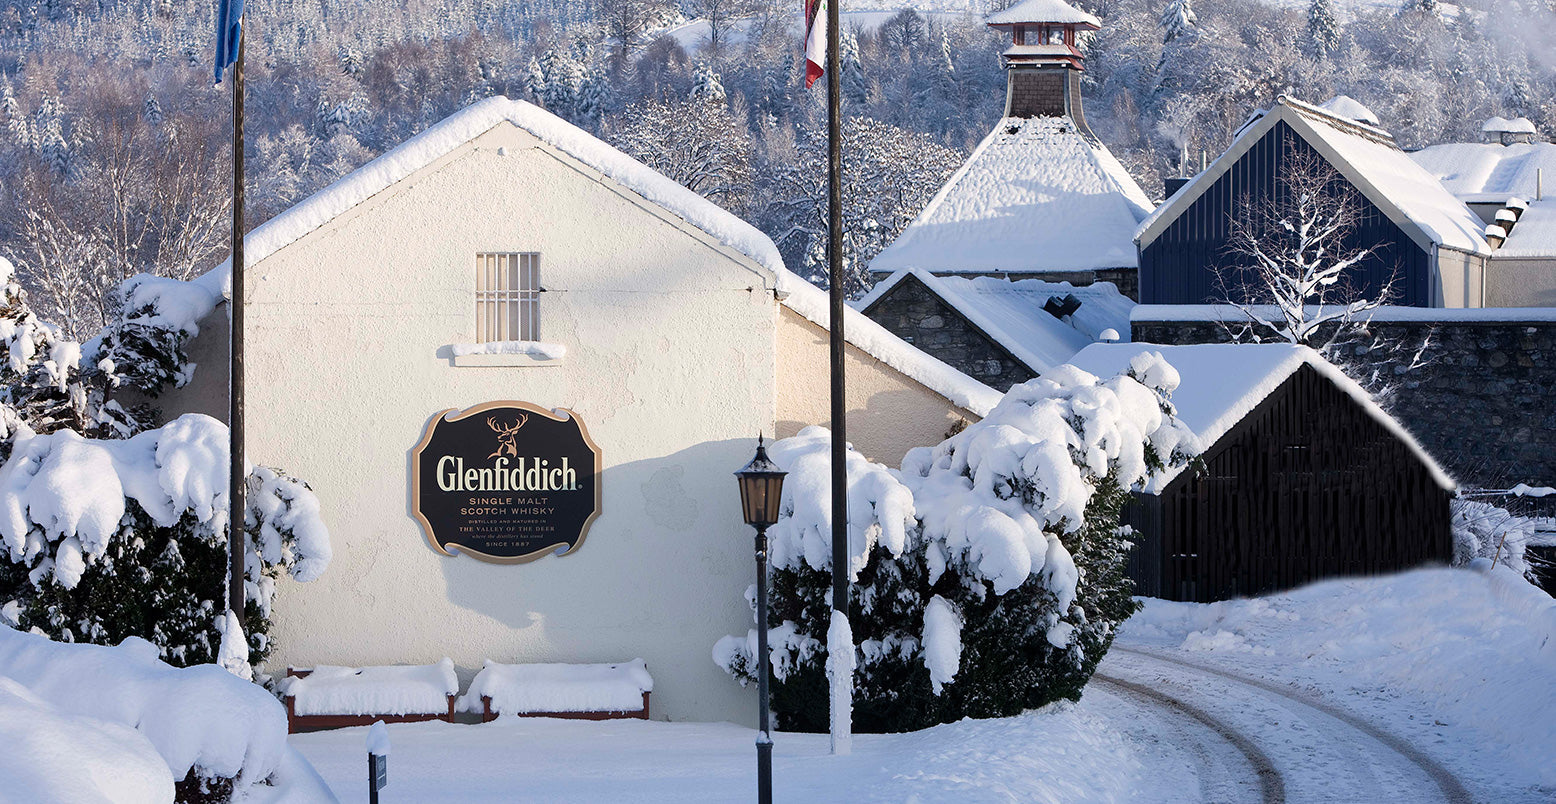 Transform your winter nights into moments of pure sophistication with Glenfiddich Whisky and a blanket of snow